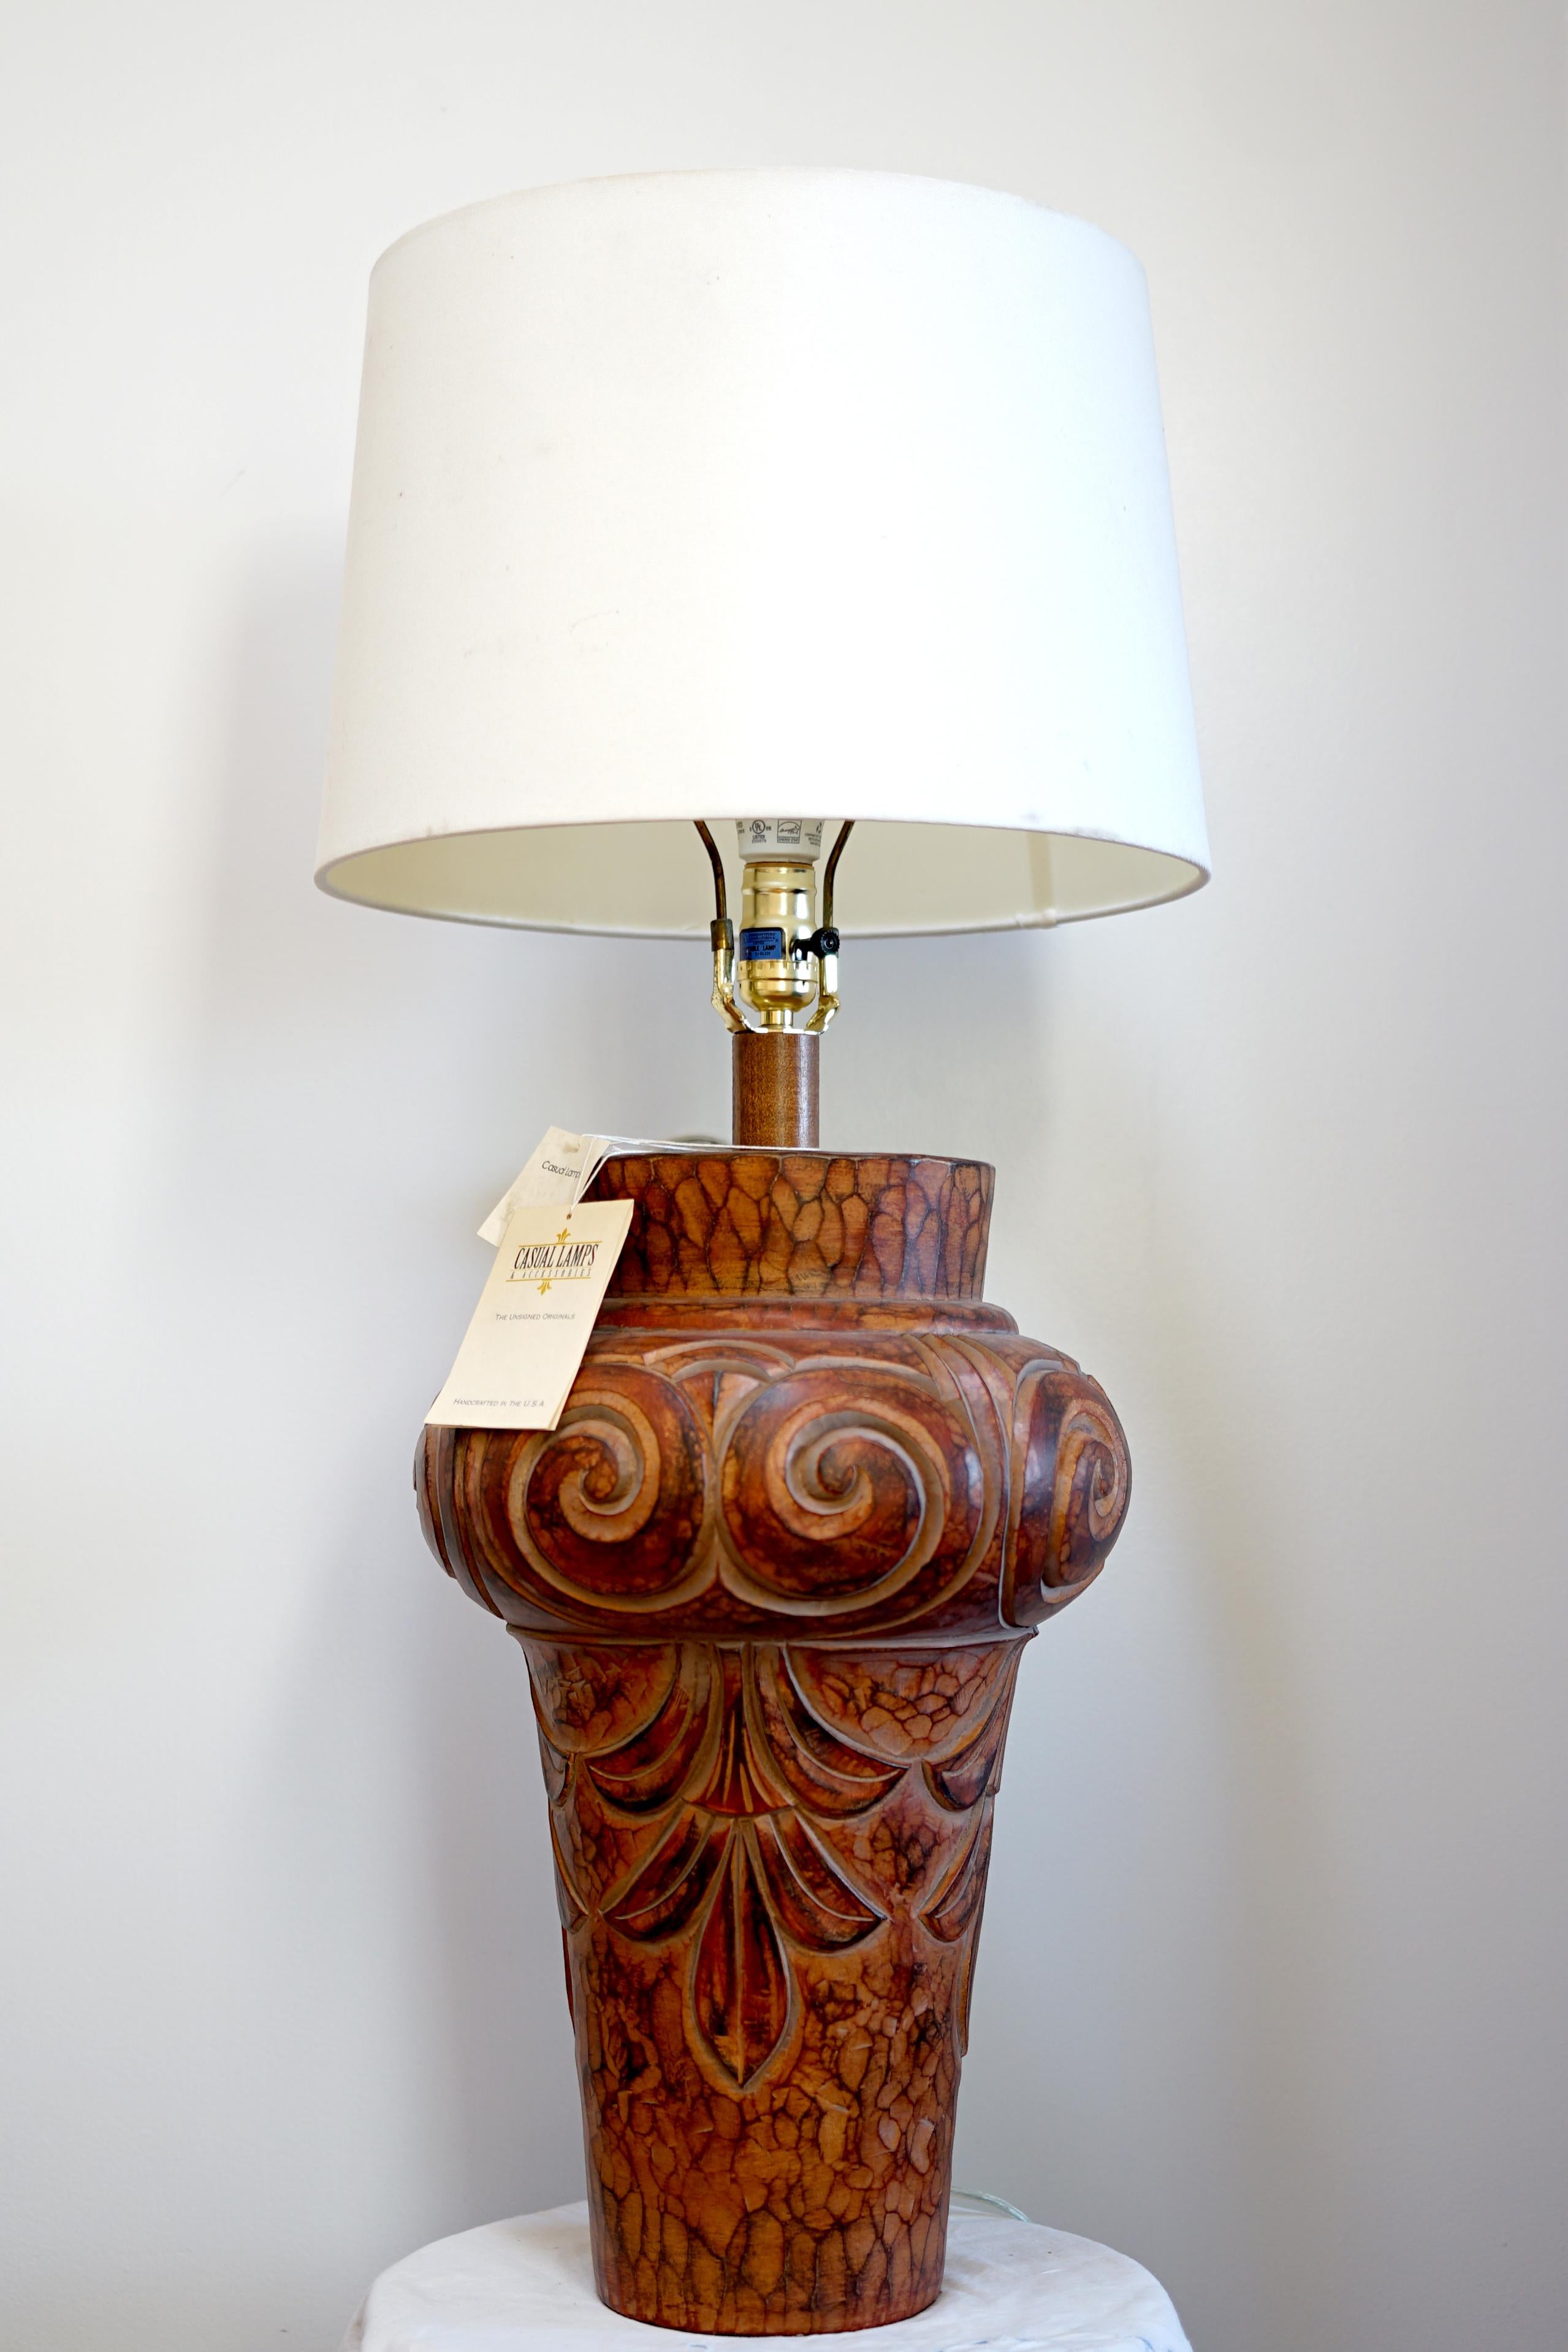 Casual Lamps of California Terracotta Monumental Sculpted Lamp Glazed Finish In Excellent Condition For Sale In Lomita, CA